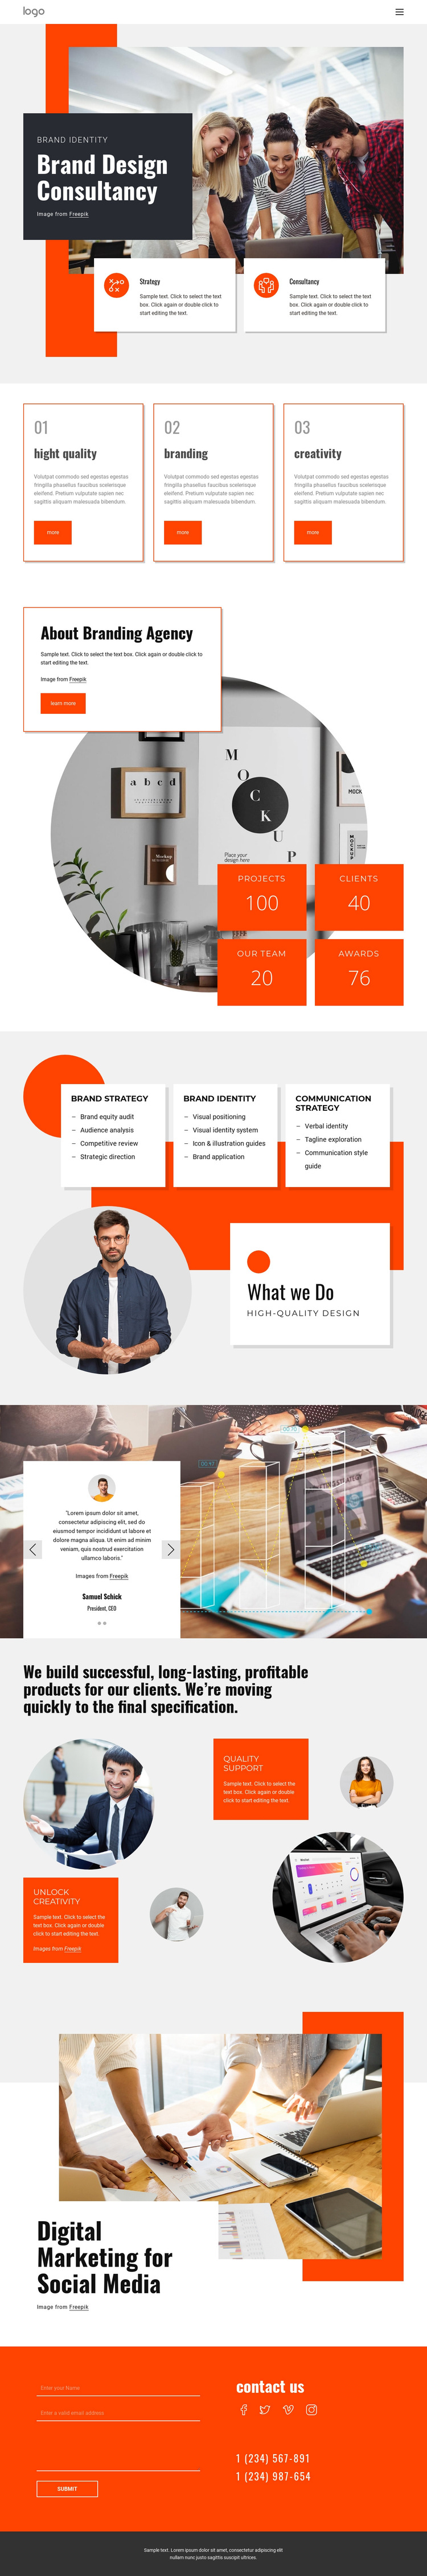 Growth design agency HTML5 Template